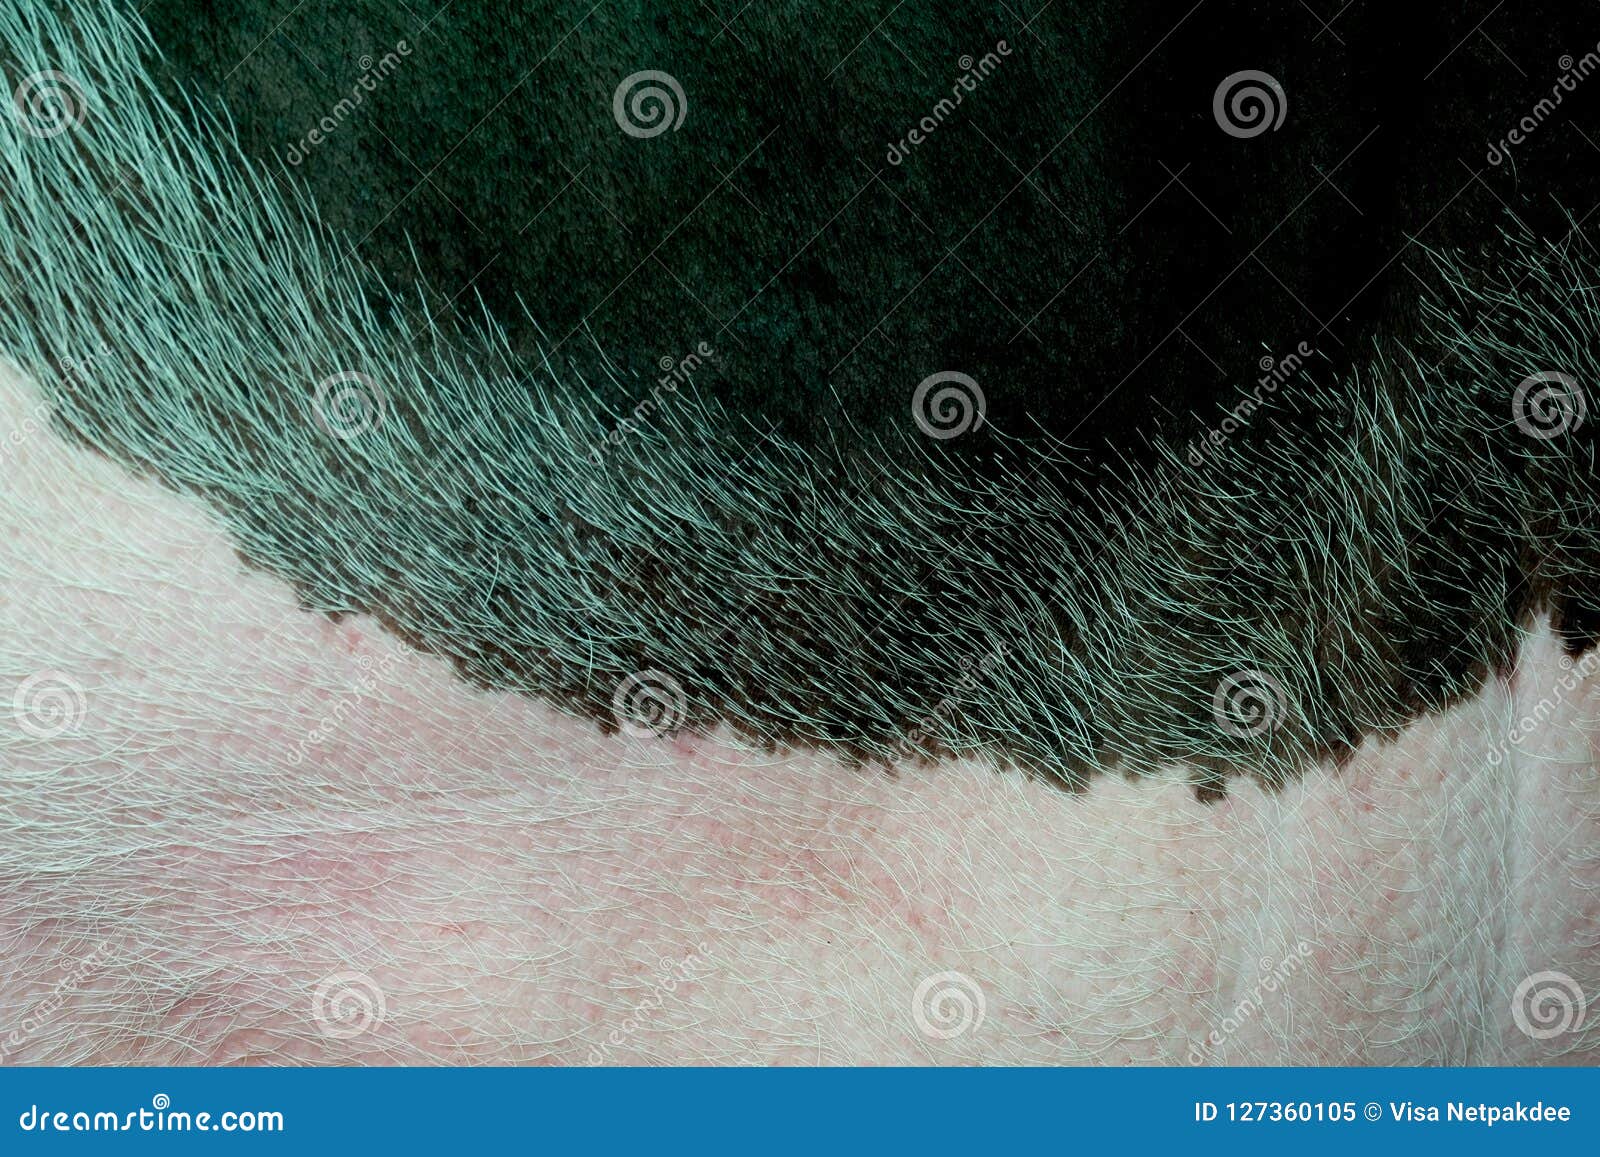 Close Up Skin Pig For Background Stock Image Image Of White